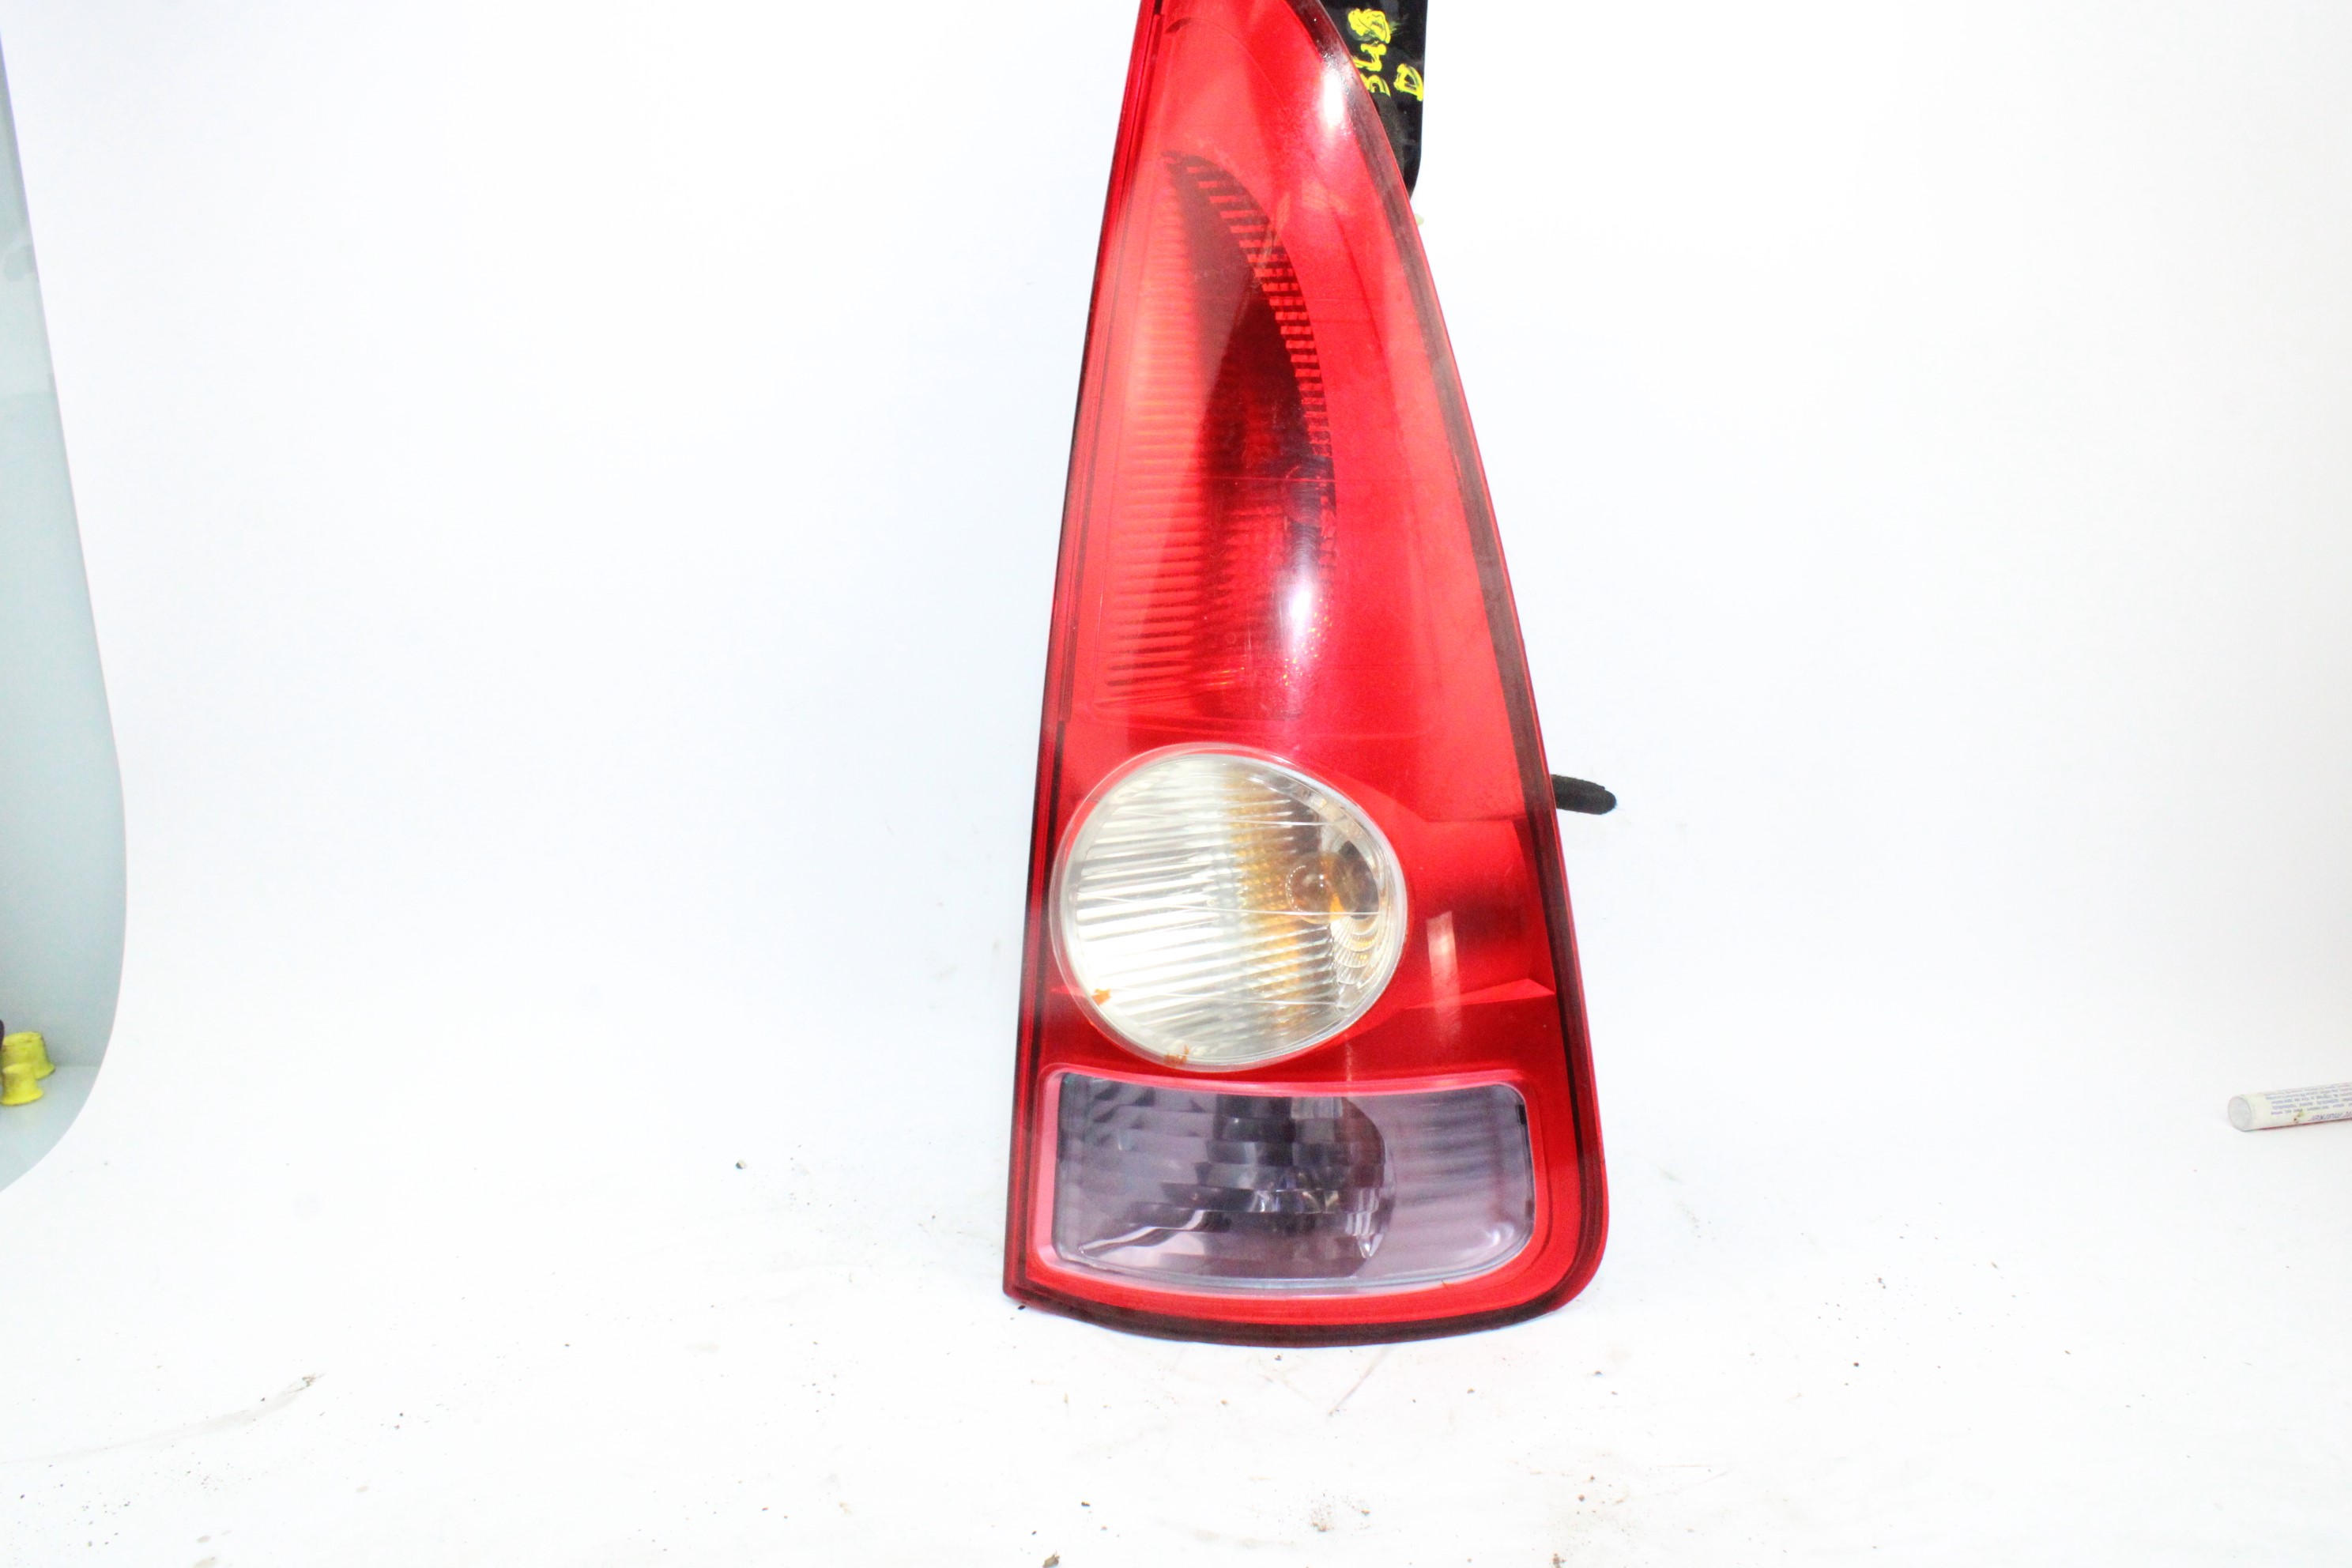 RENAULT Espace 4 generation (2002-2014) Rear Right Taillight Lamp 8200027152 23767380